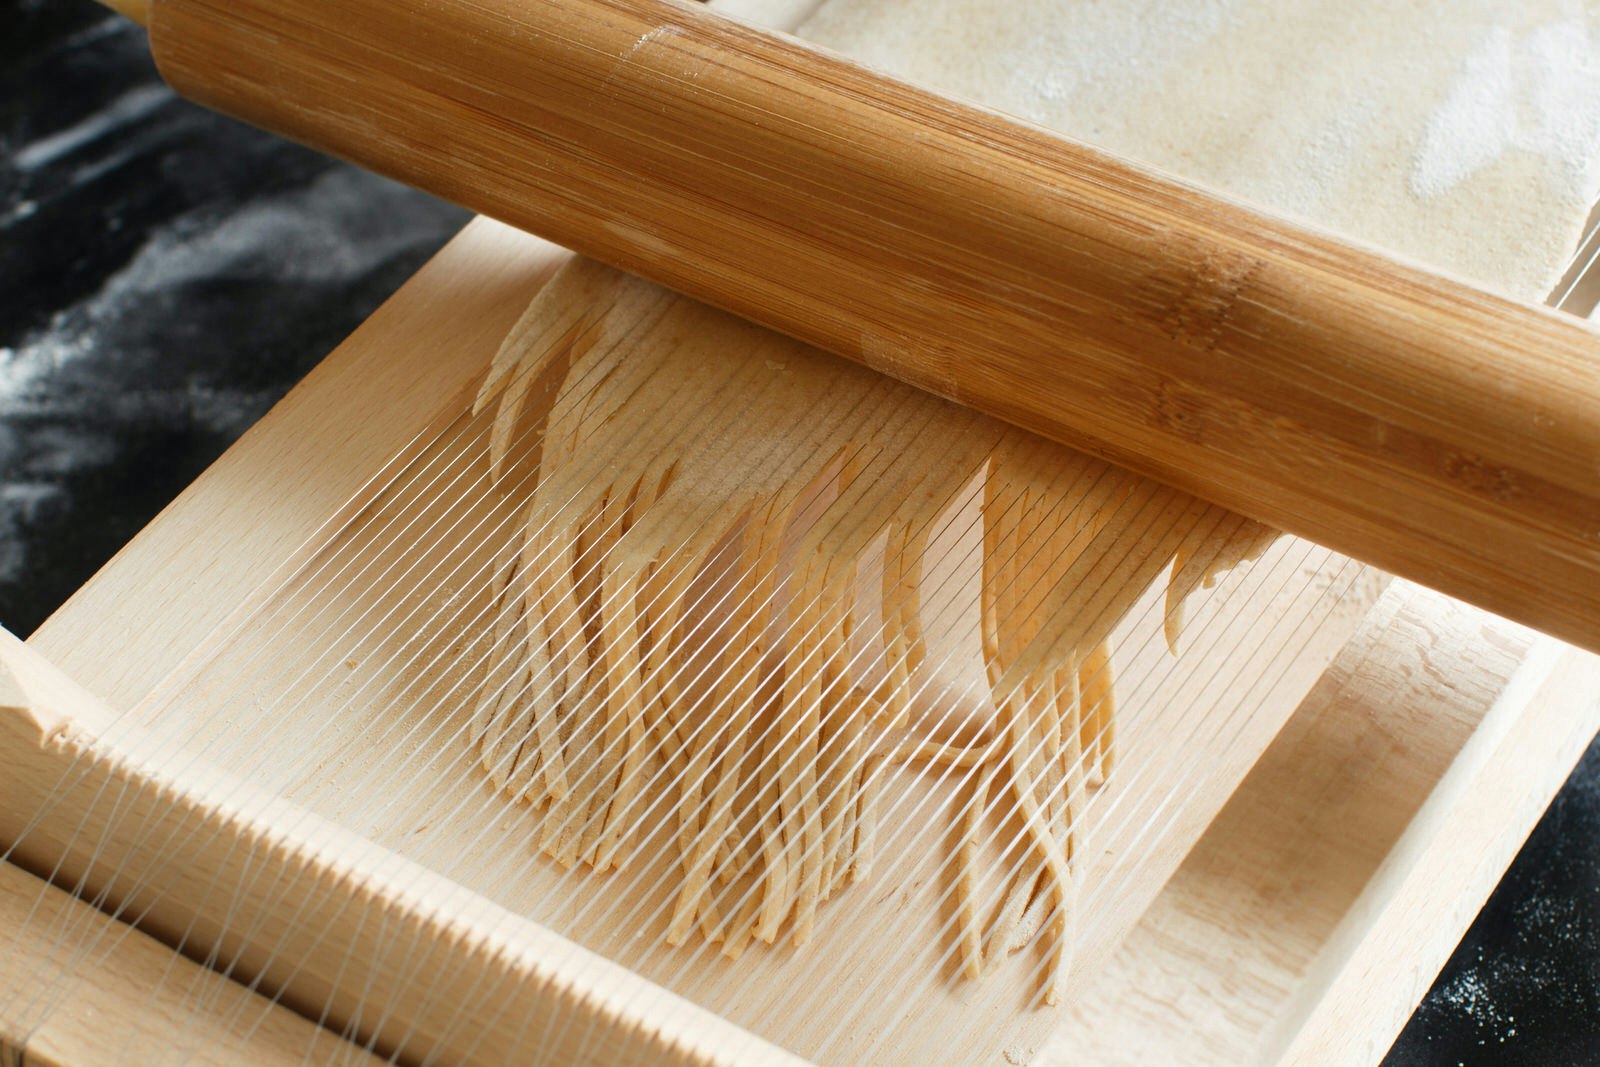 Making spaghetti alla chitarra, an Abruzzo speciality, with a tool that uses very thin guitar-like strings to perfectly slice the pasta